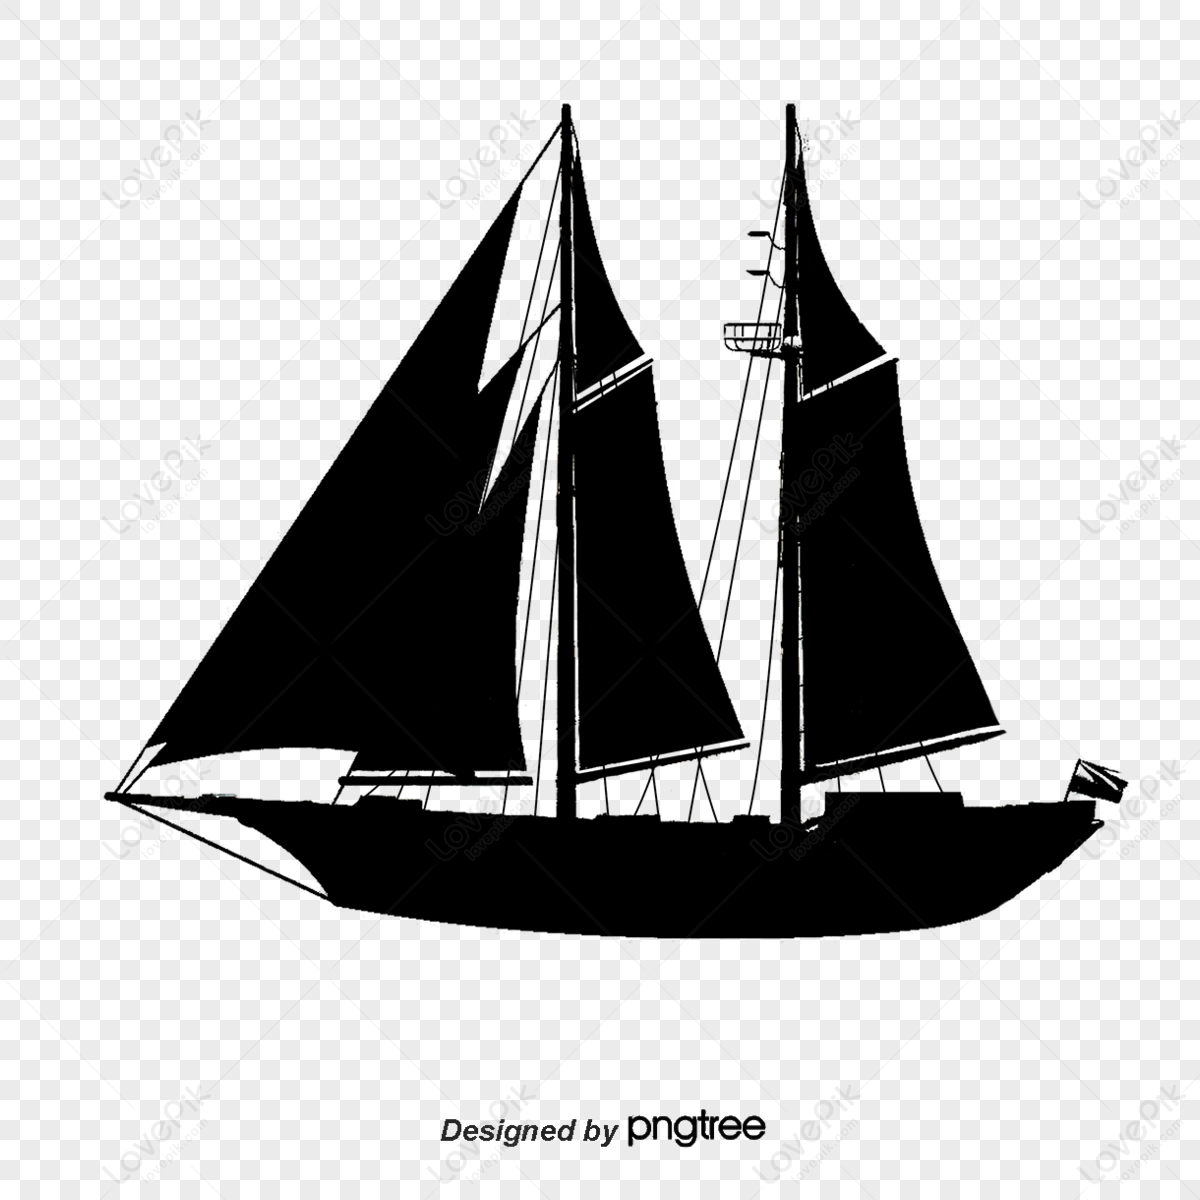 Ship Wheel Silhouette PNG And Vector Images Free Download - Pngtree